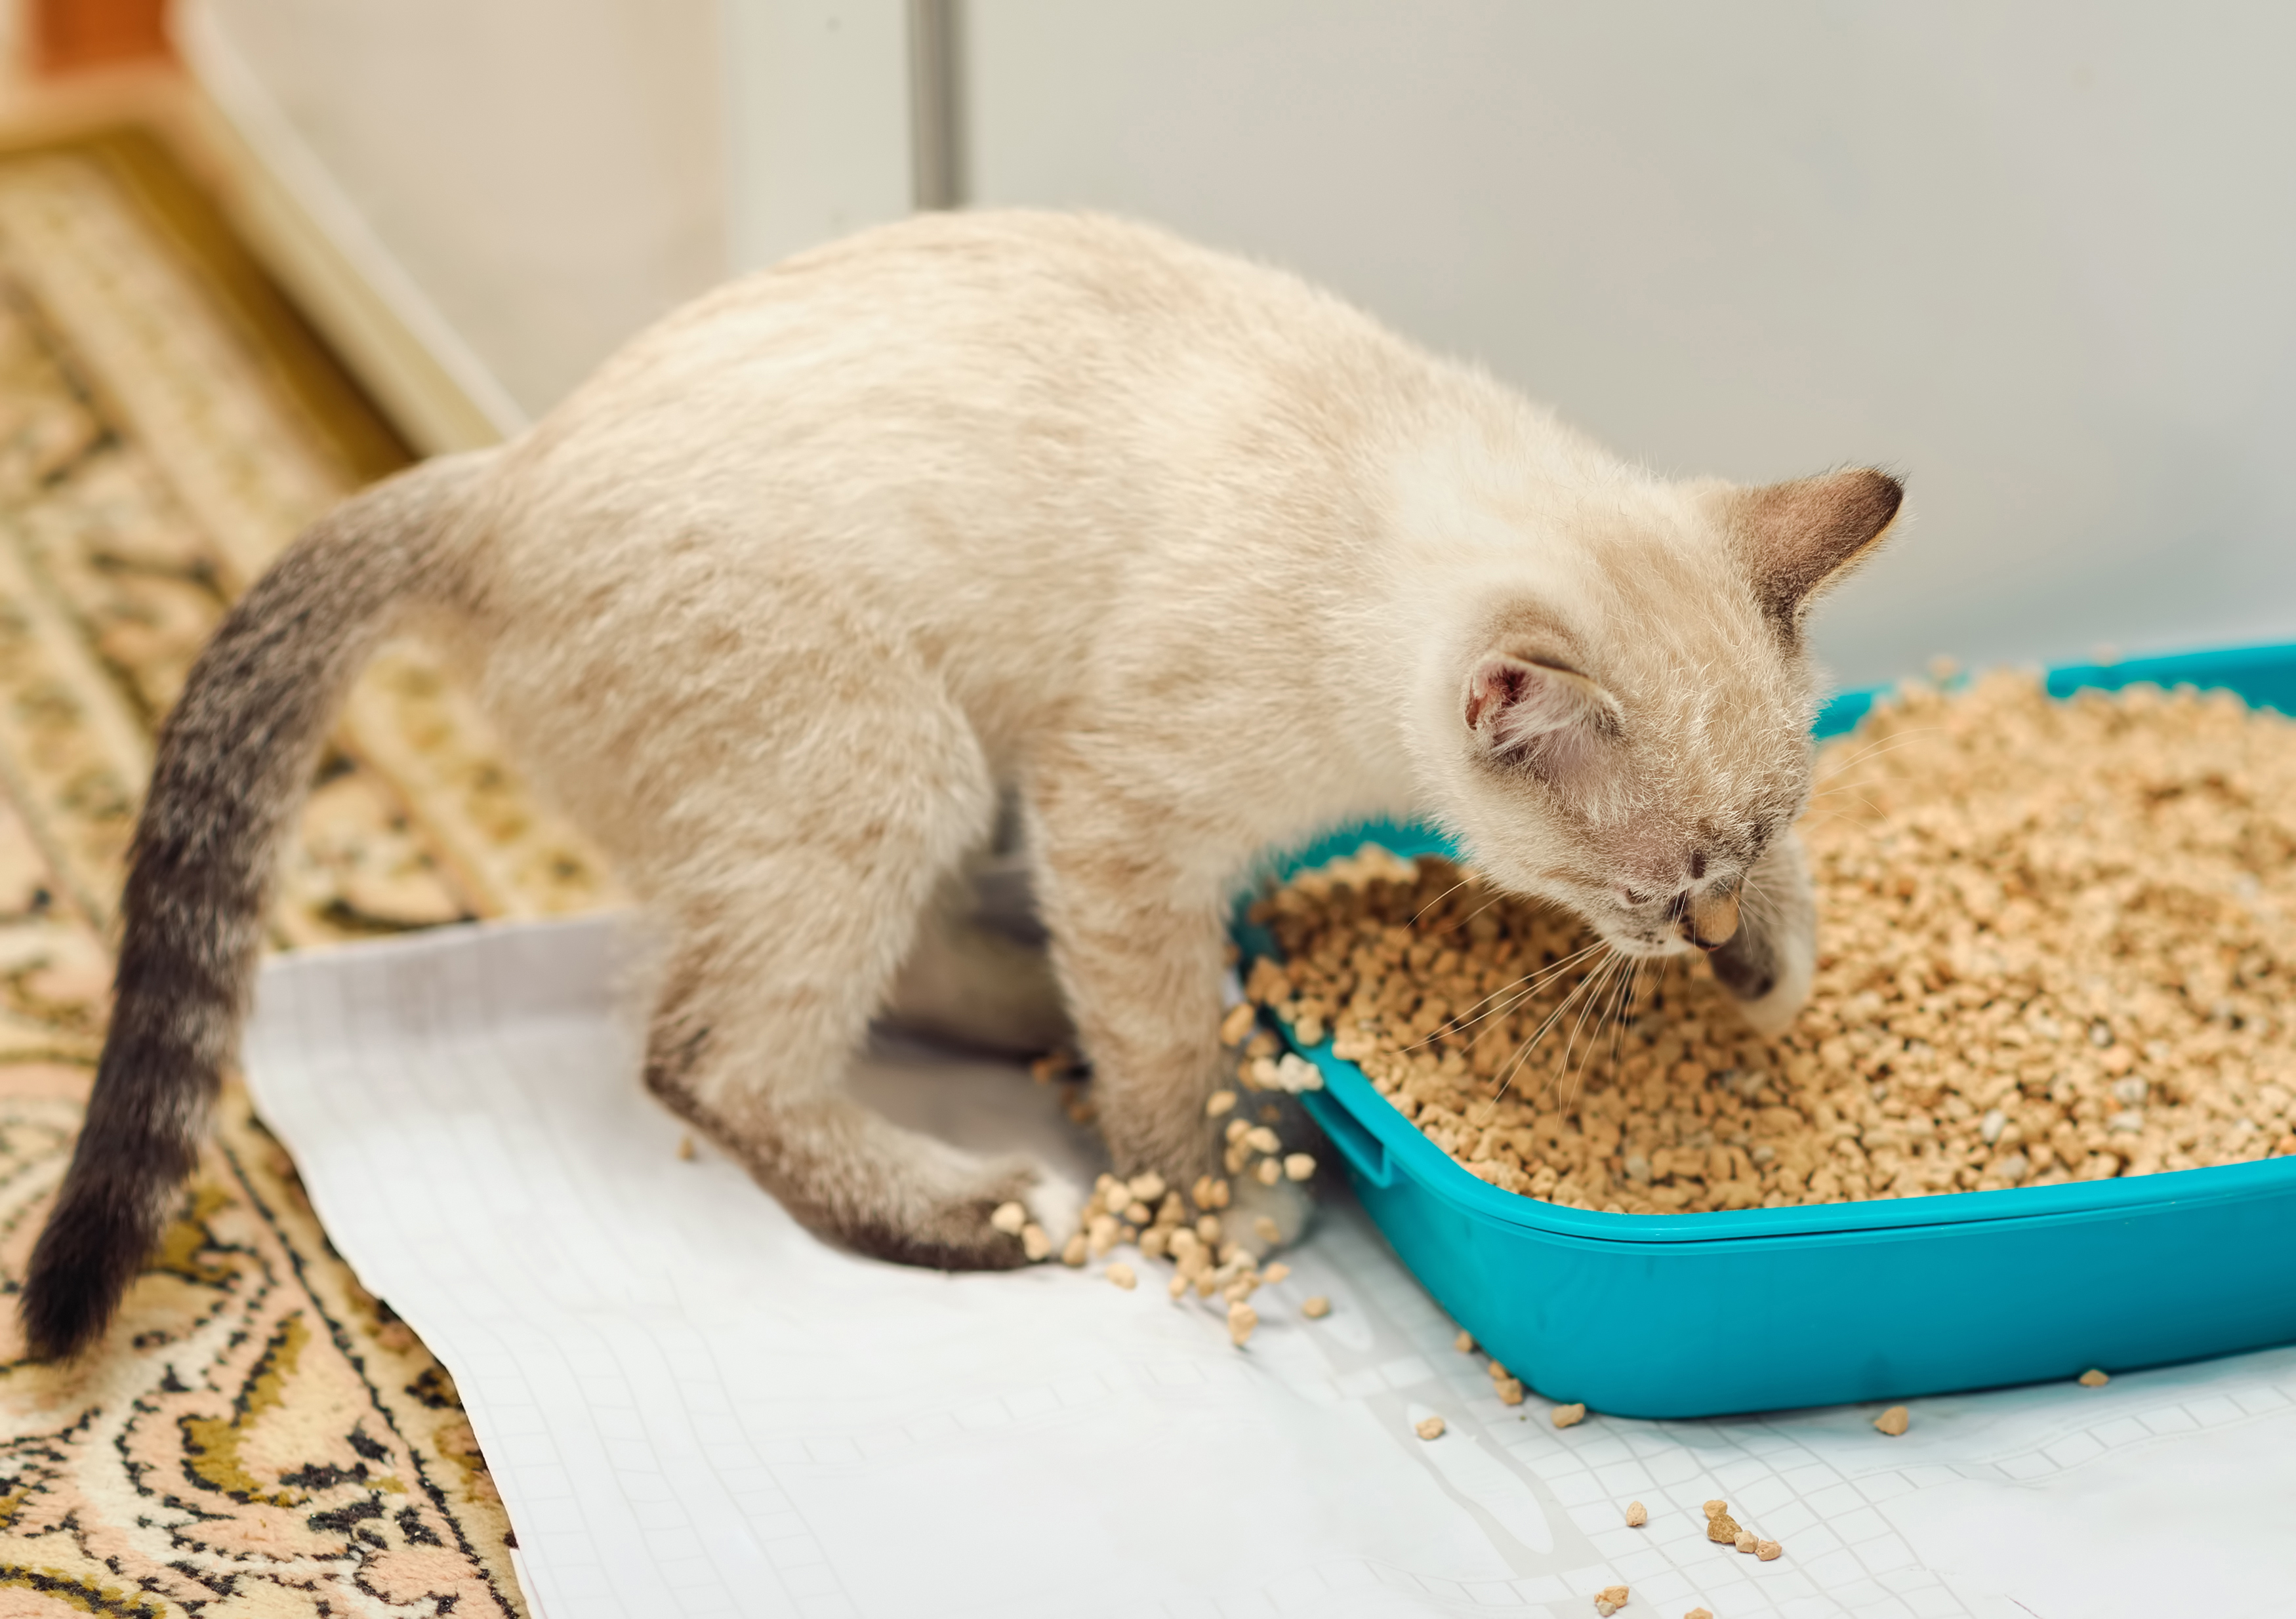 Siamese point kitten digging in plant based natural litter